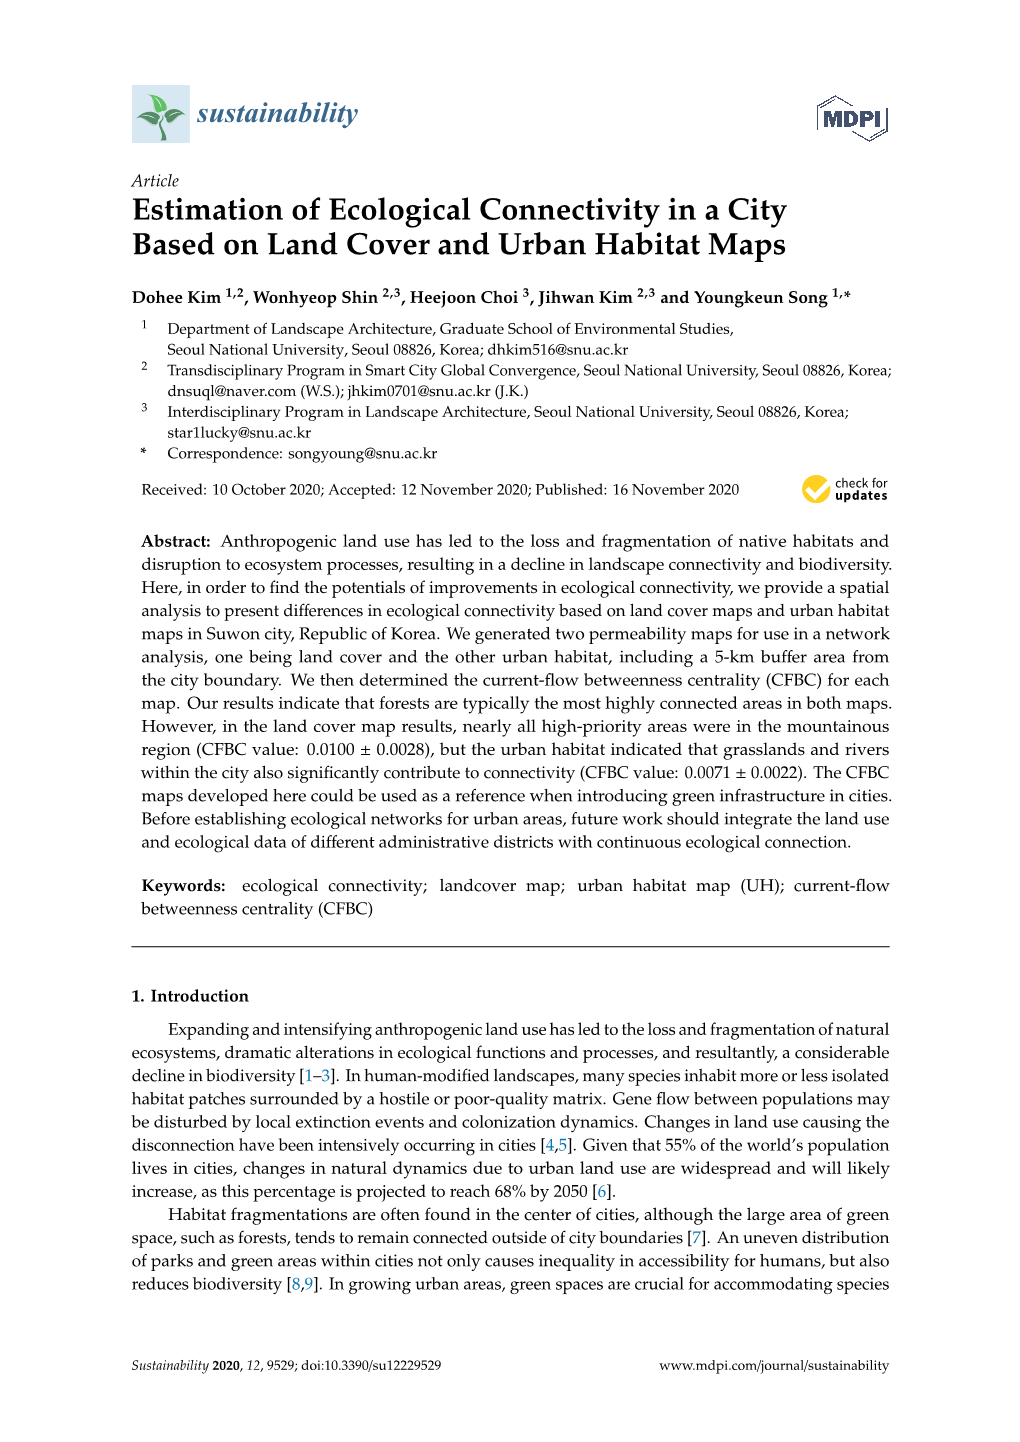 Estimation of Ecological Connectivity in a City Based on Land Cover and Urban Habitat Maps